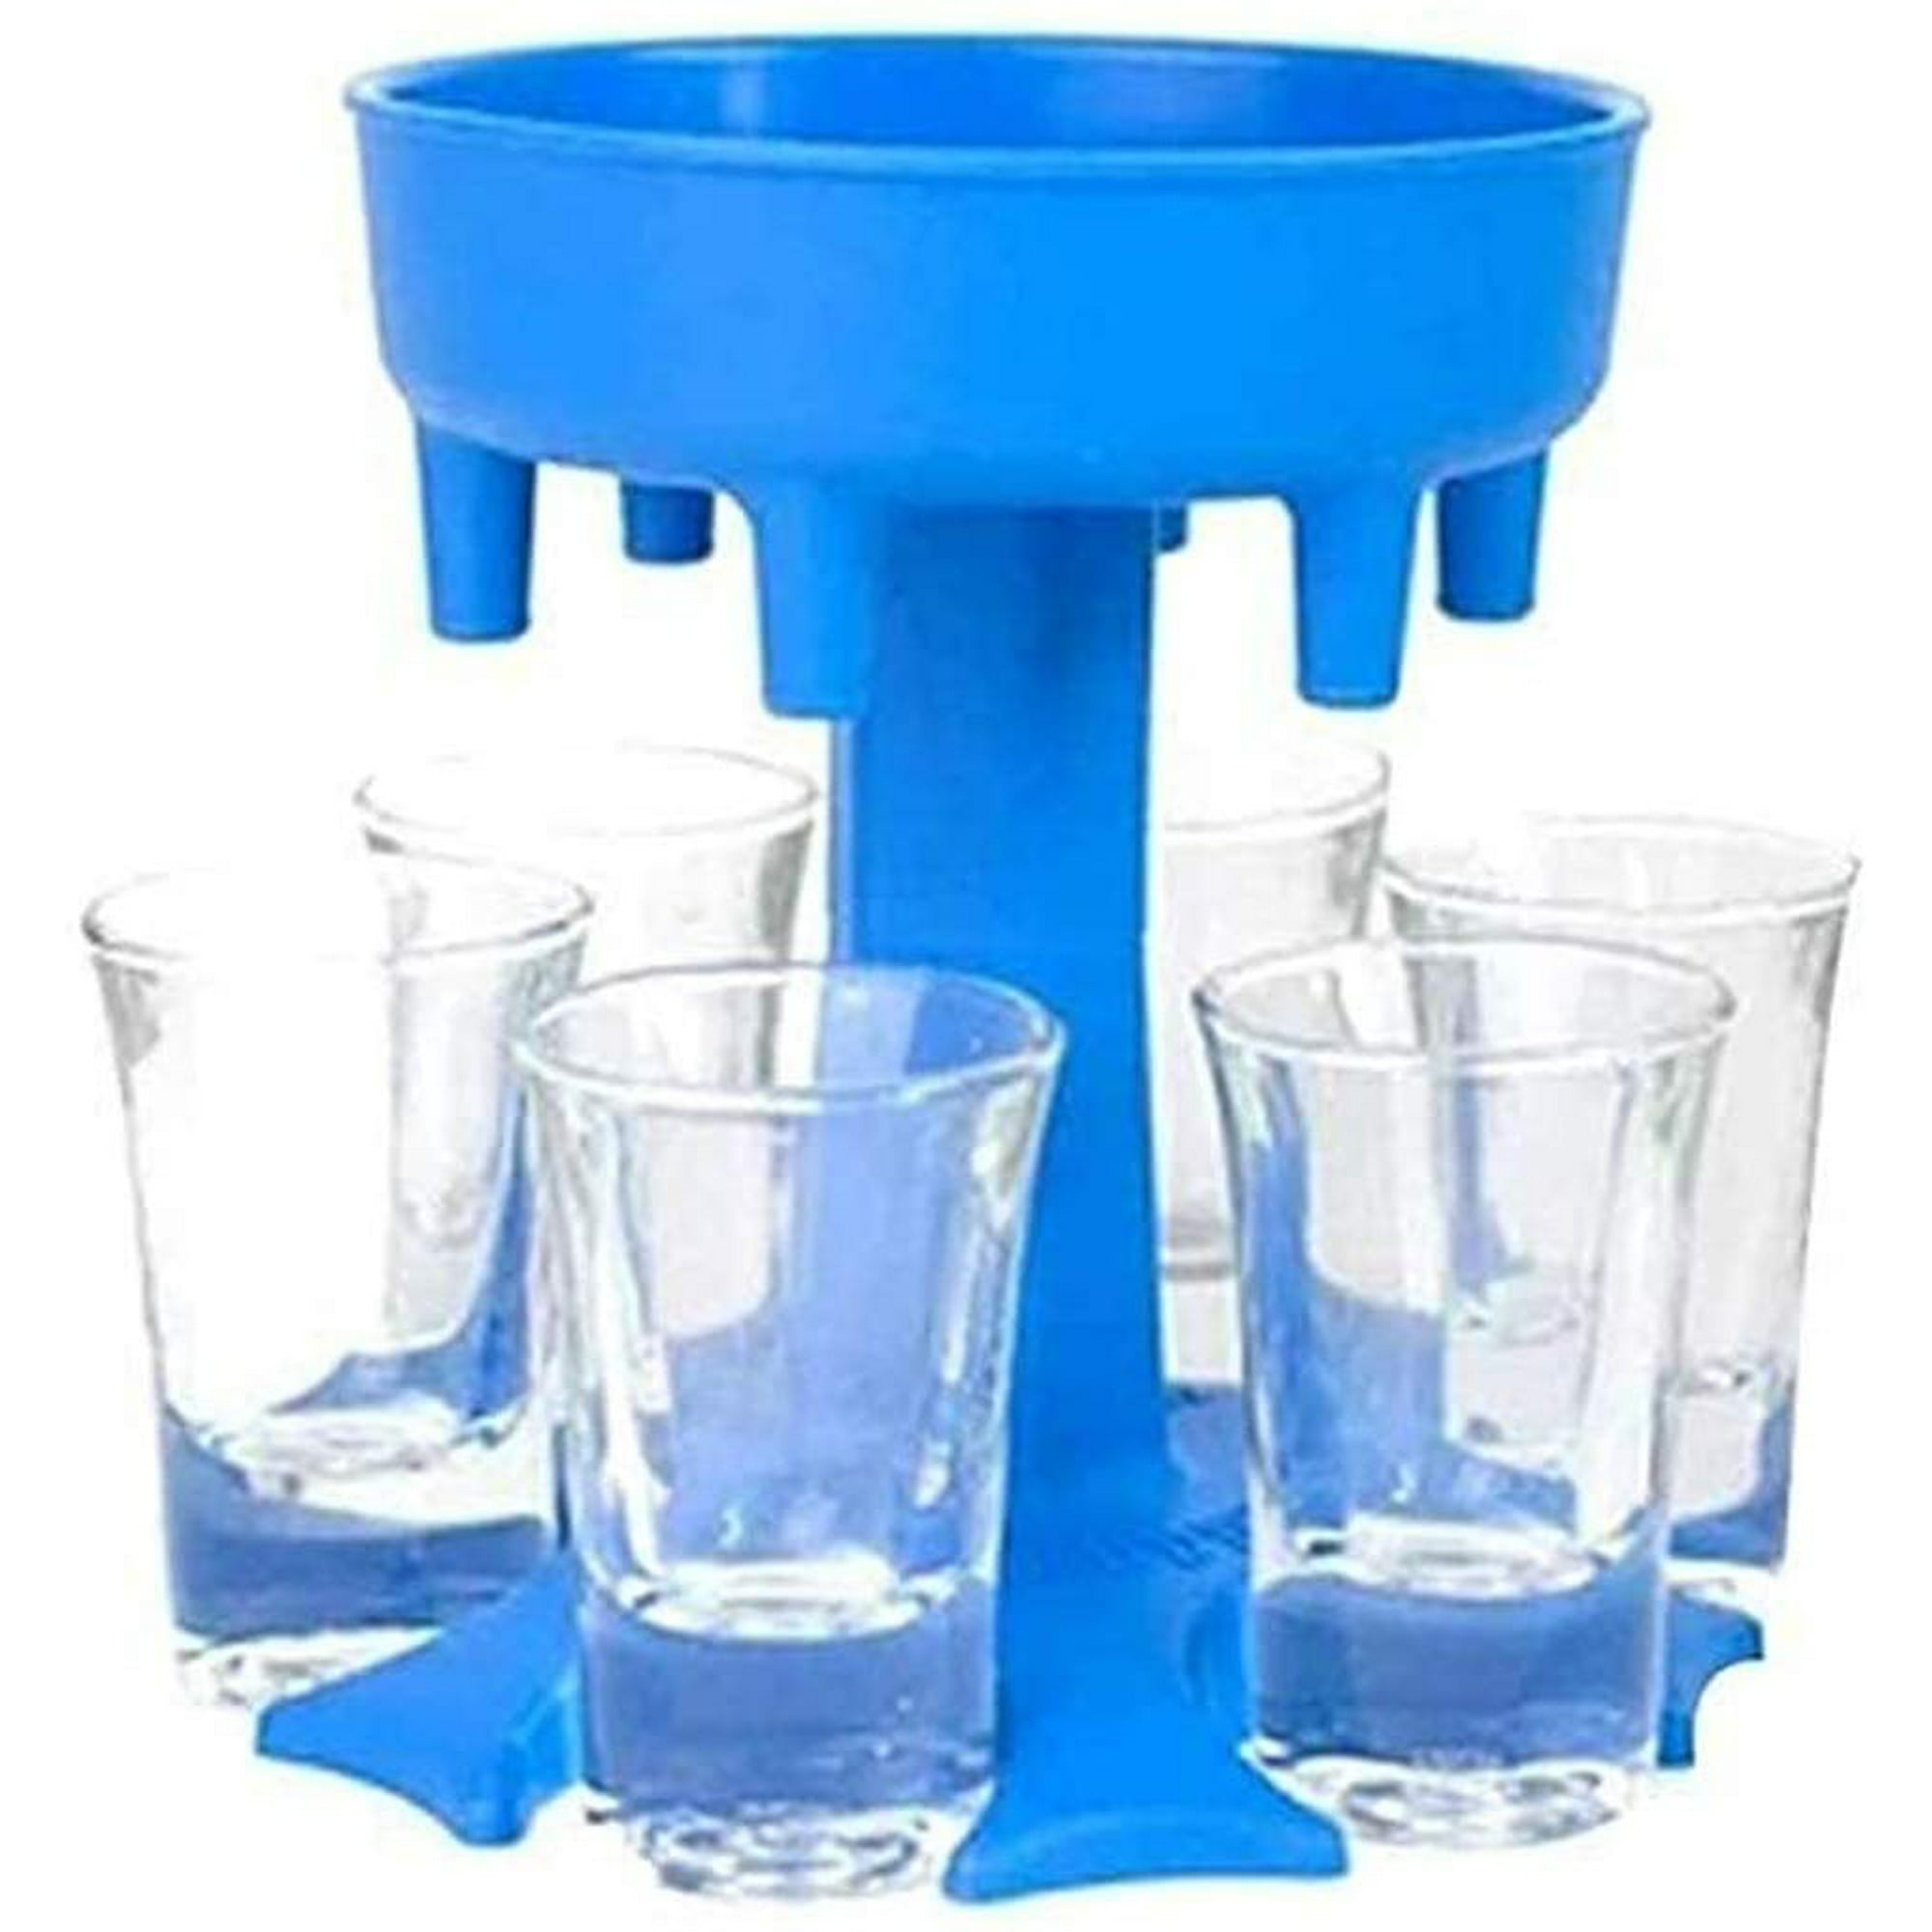 6 Shot Glass Dispenser Holder Liquor Party Gifts Bar Drinking Games Wine cup USA 